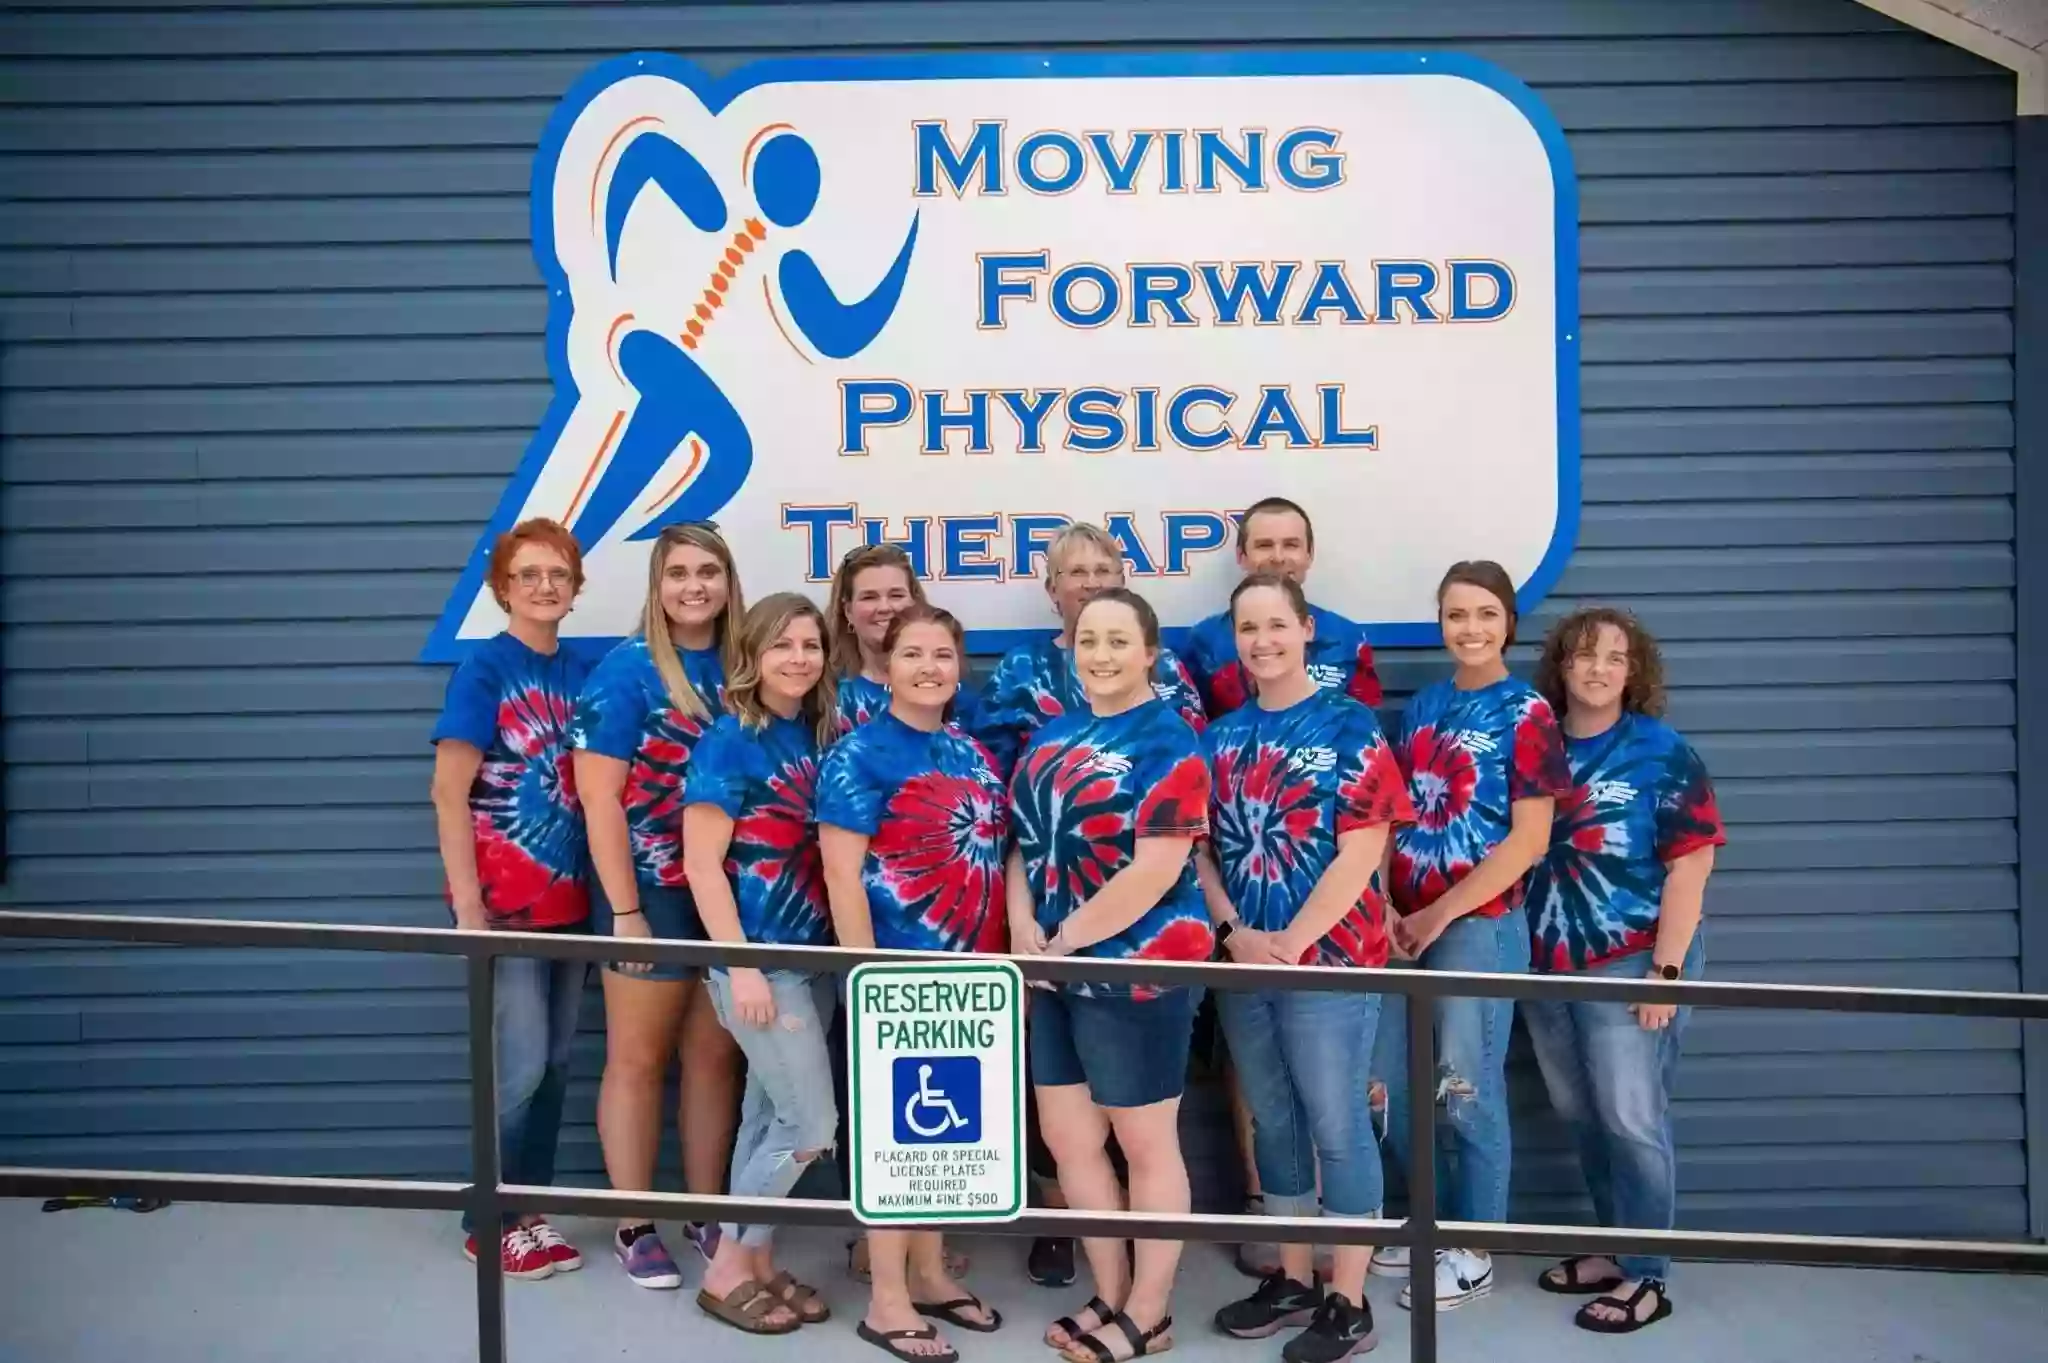 Moving Forward Physical Therapy, Inc.